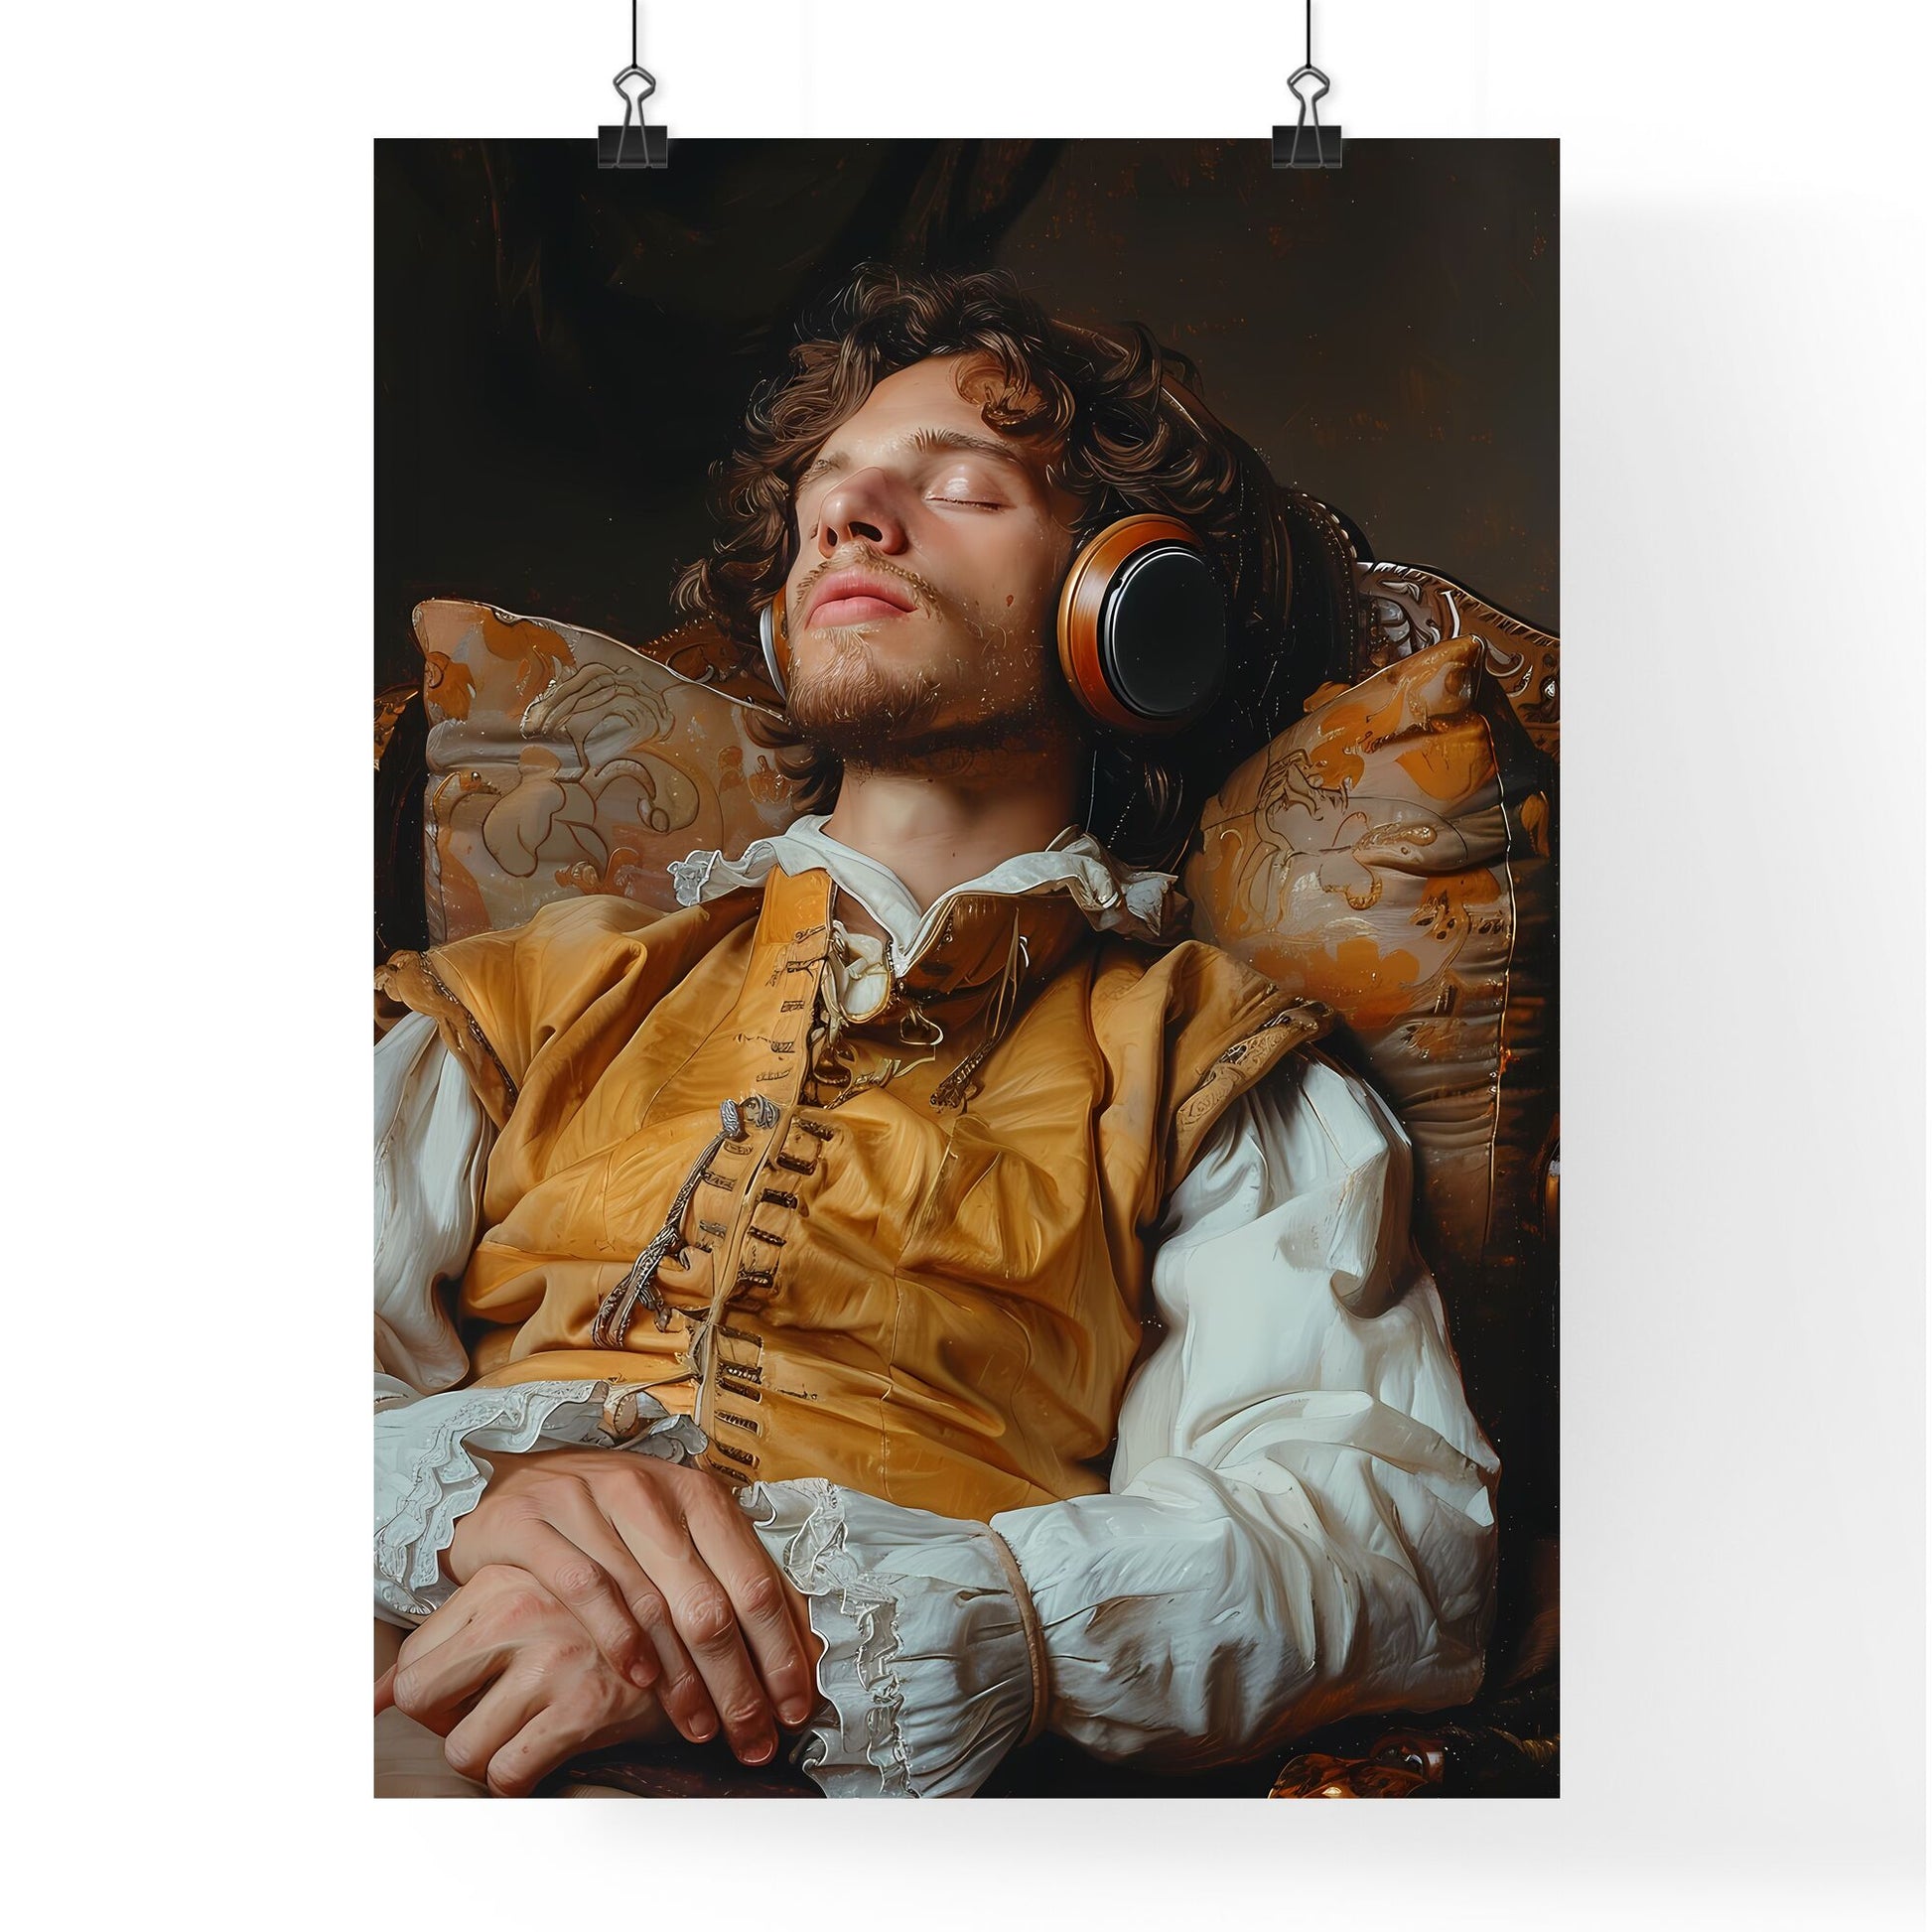 Baroque Extravagant Oil Painting: Man with Headset Listening to Music in Rococo Room Default Title